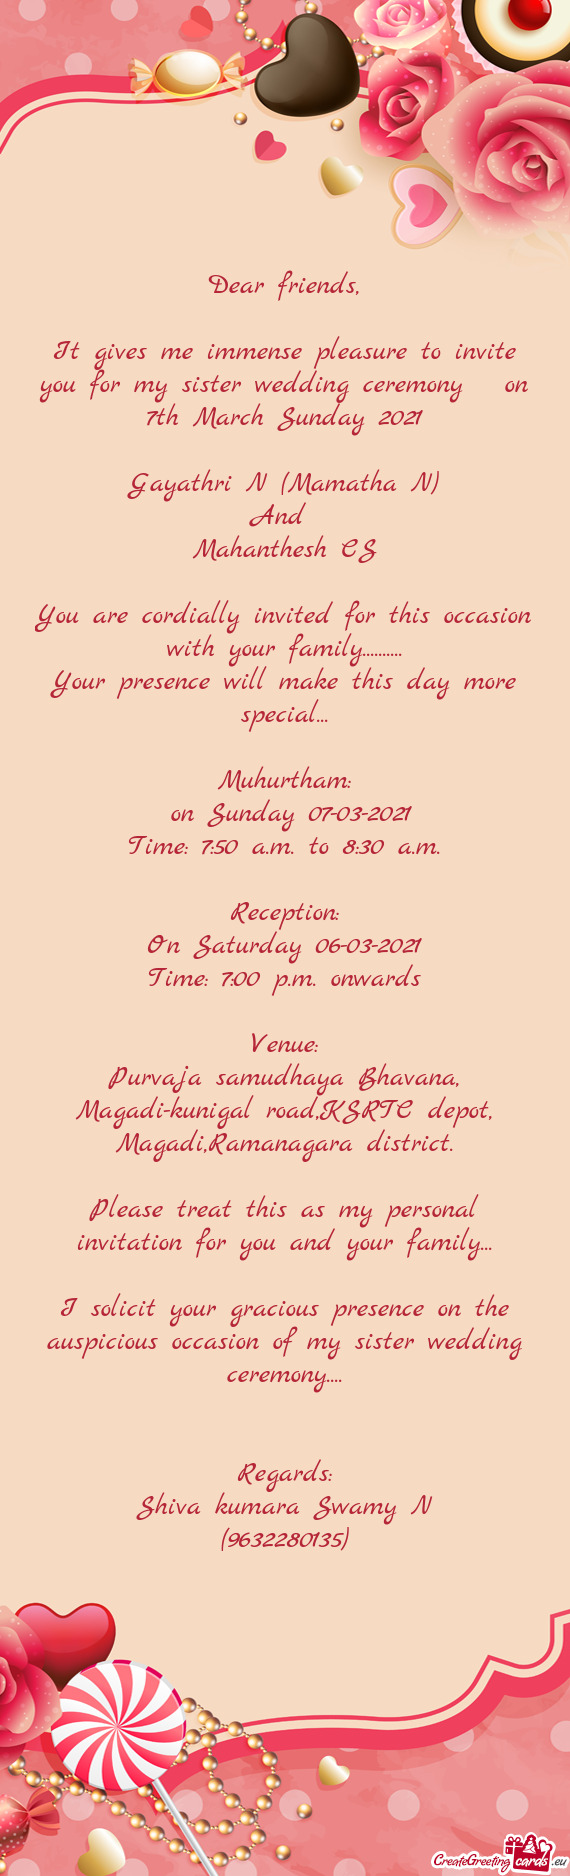 It gives me immense pleasure to invite you for my sister wedding ceremony on 7th March Sunday 2021